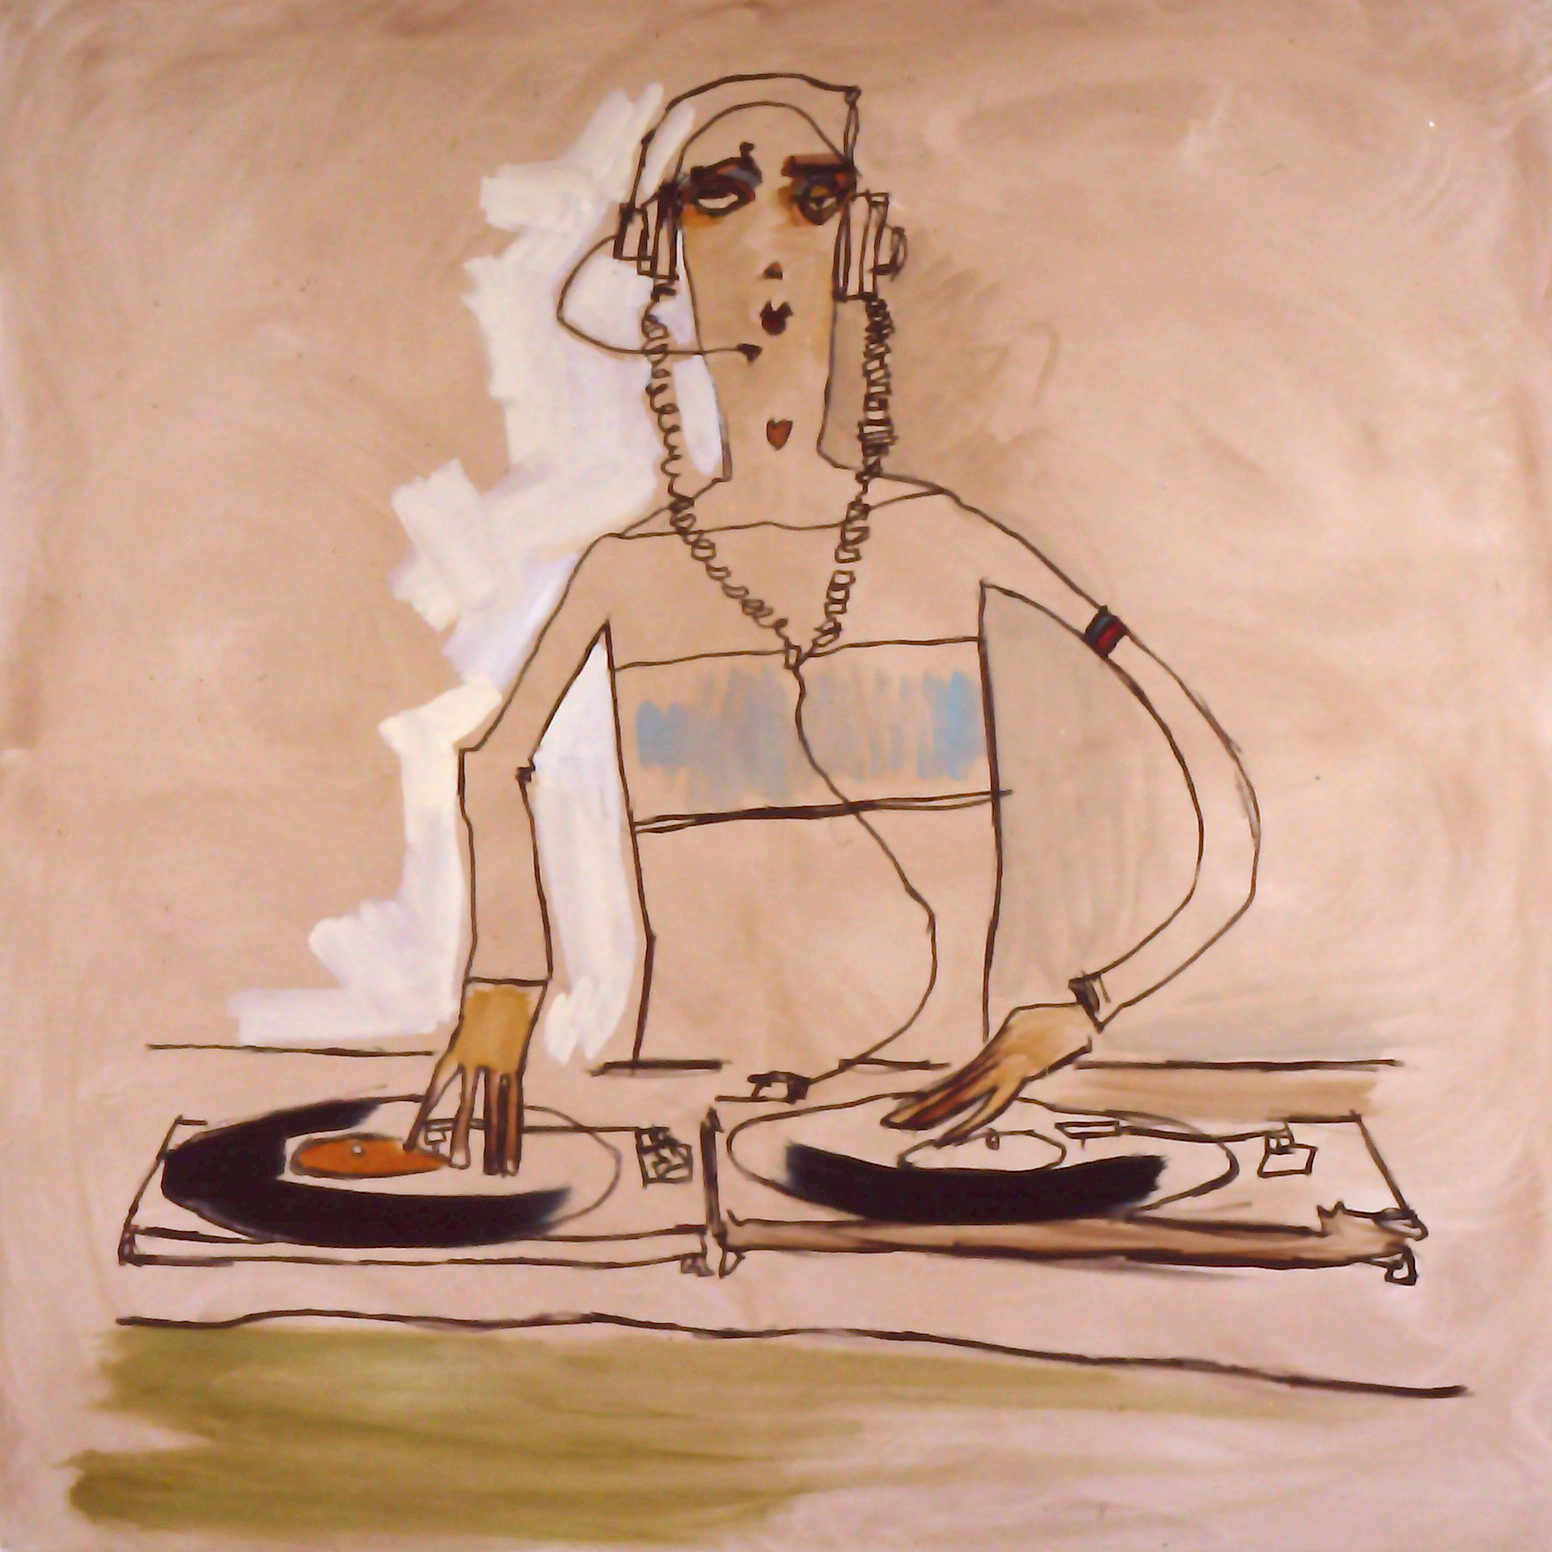 "DJ Spin" by Clifford Bailey Fine Art